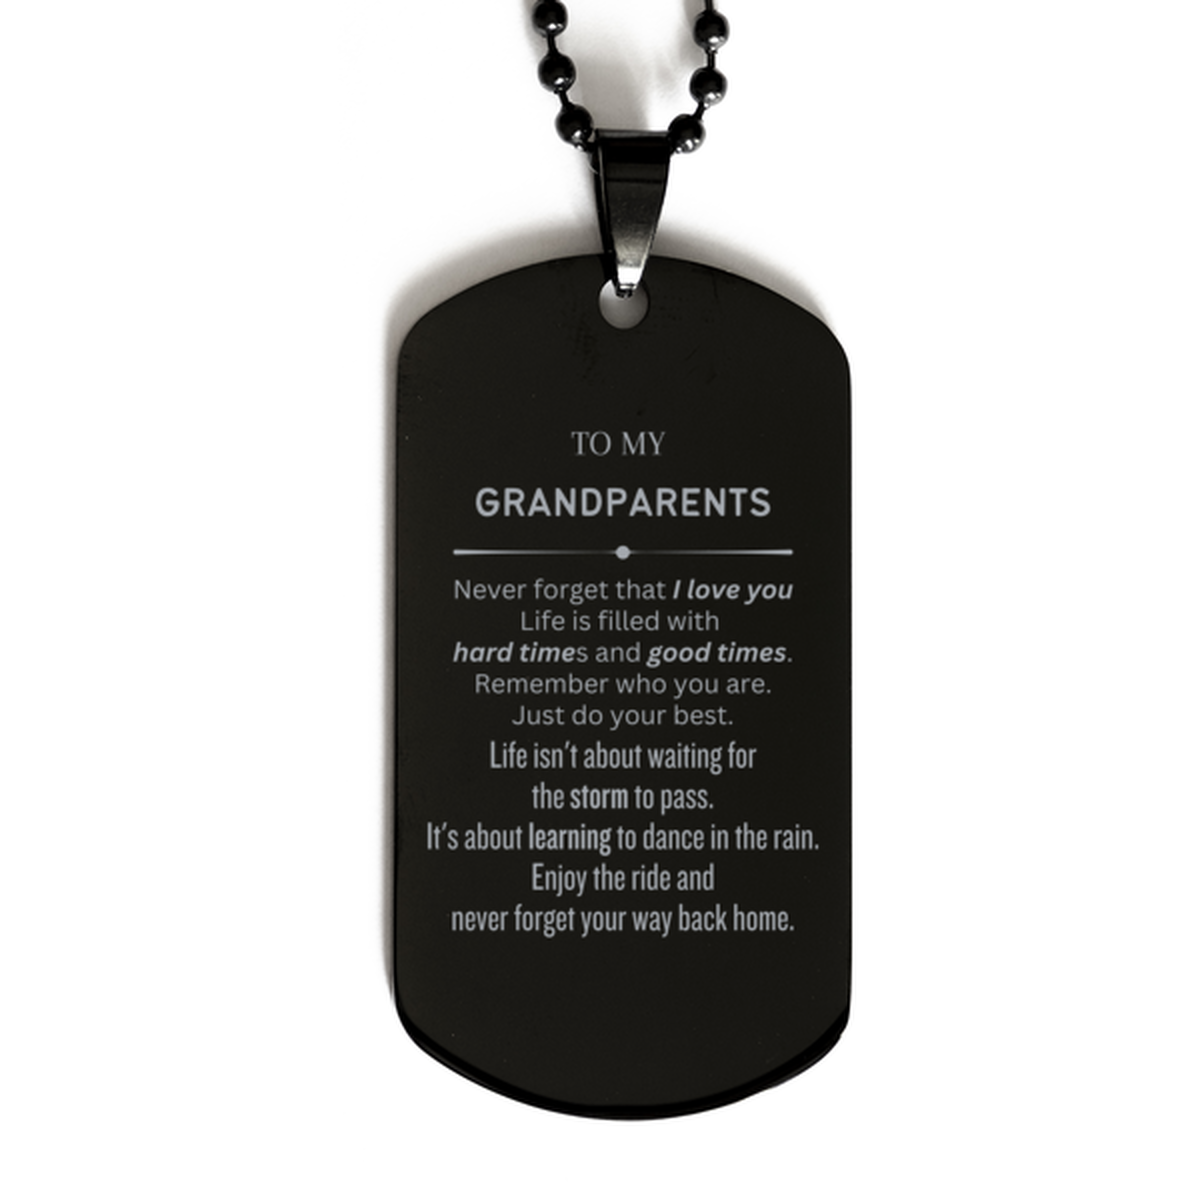 Christmas Grandparents Black Dog Tag Gifts, To My Grandparents Birthday Thank You Gifts For Grandparents, Graduation Unique Gifts For Grandparents To My Grandparents Never forget that I love you life is filled with hard times and good times. Remember who